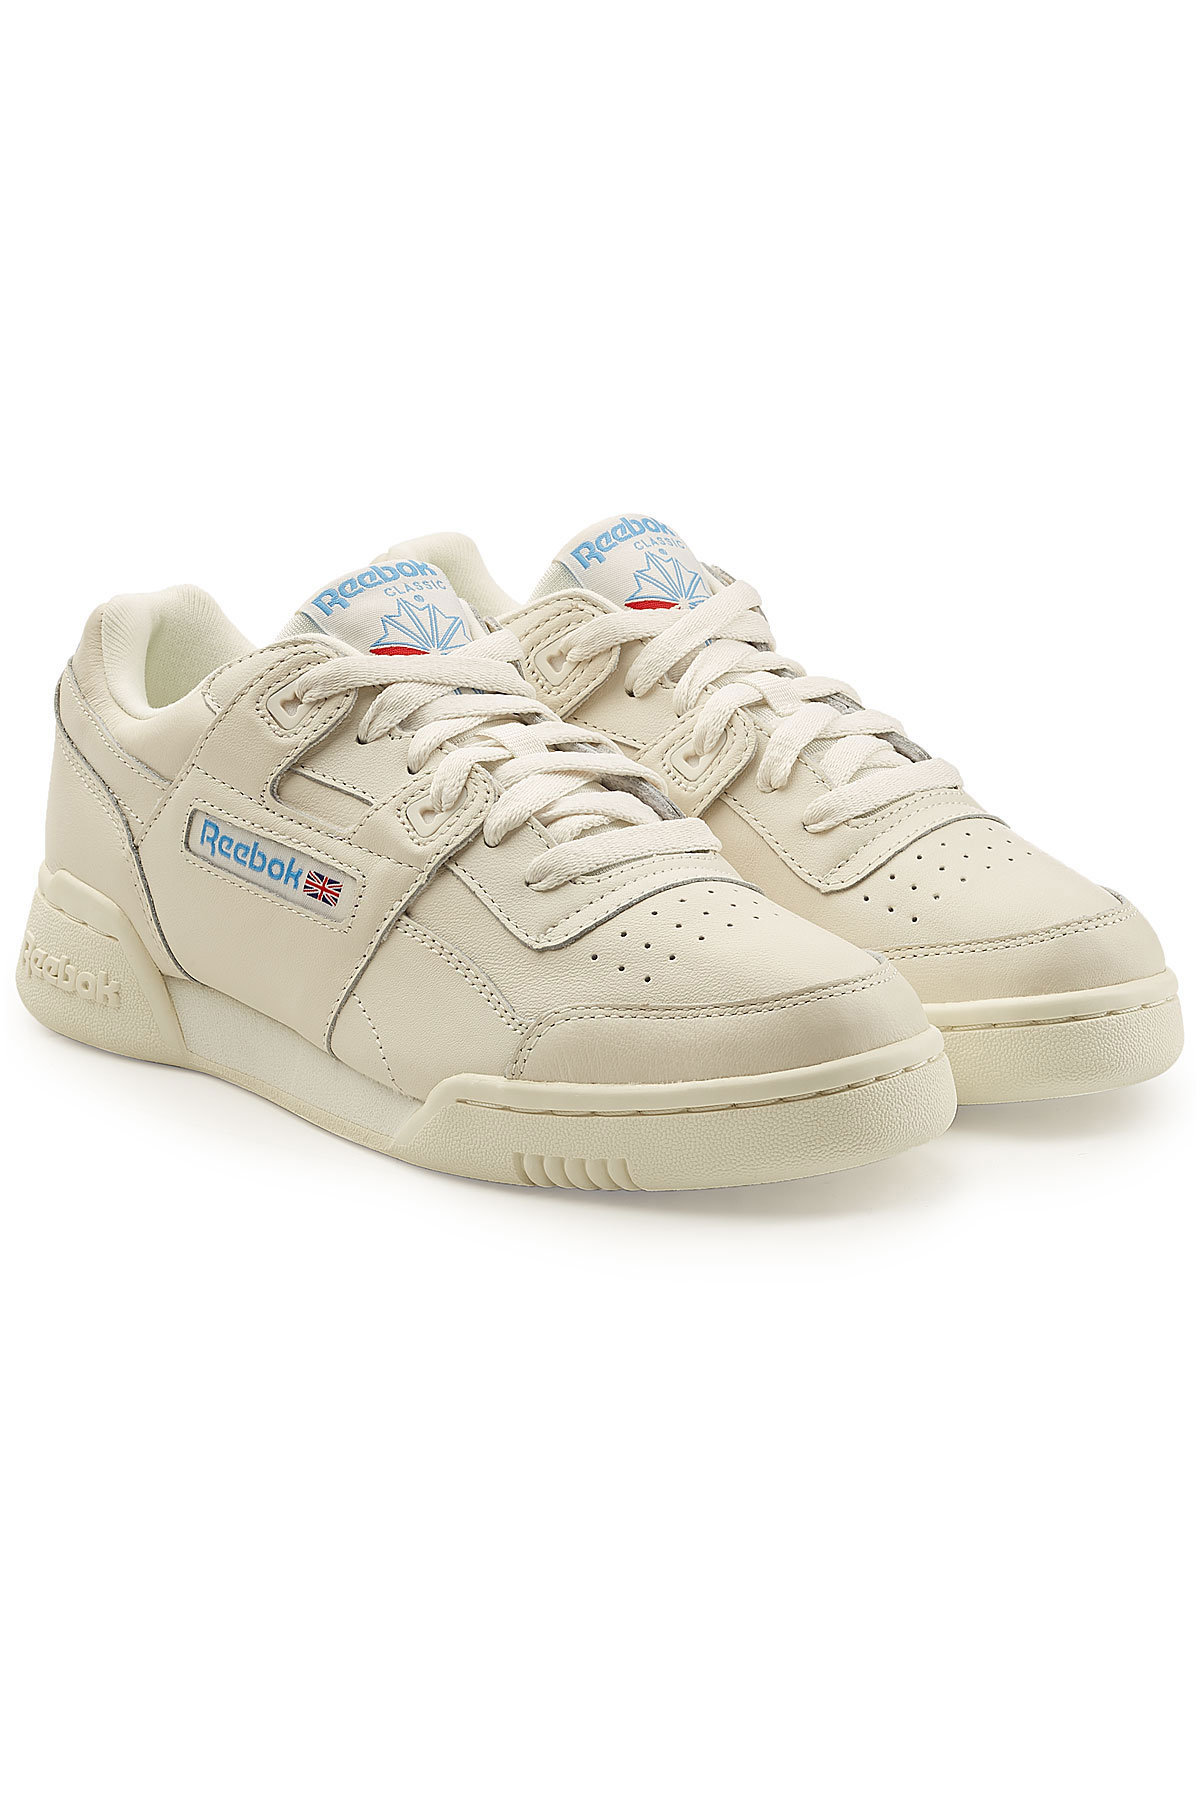 Workout Plus Leather Sneakers by Reebok